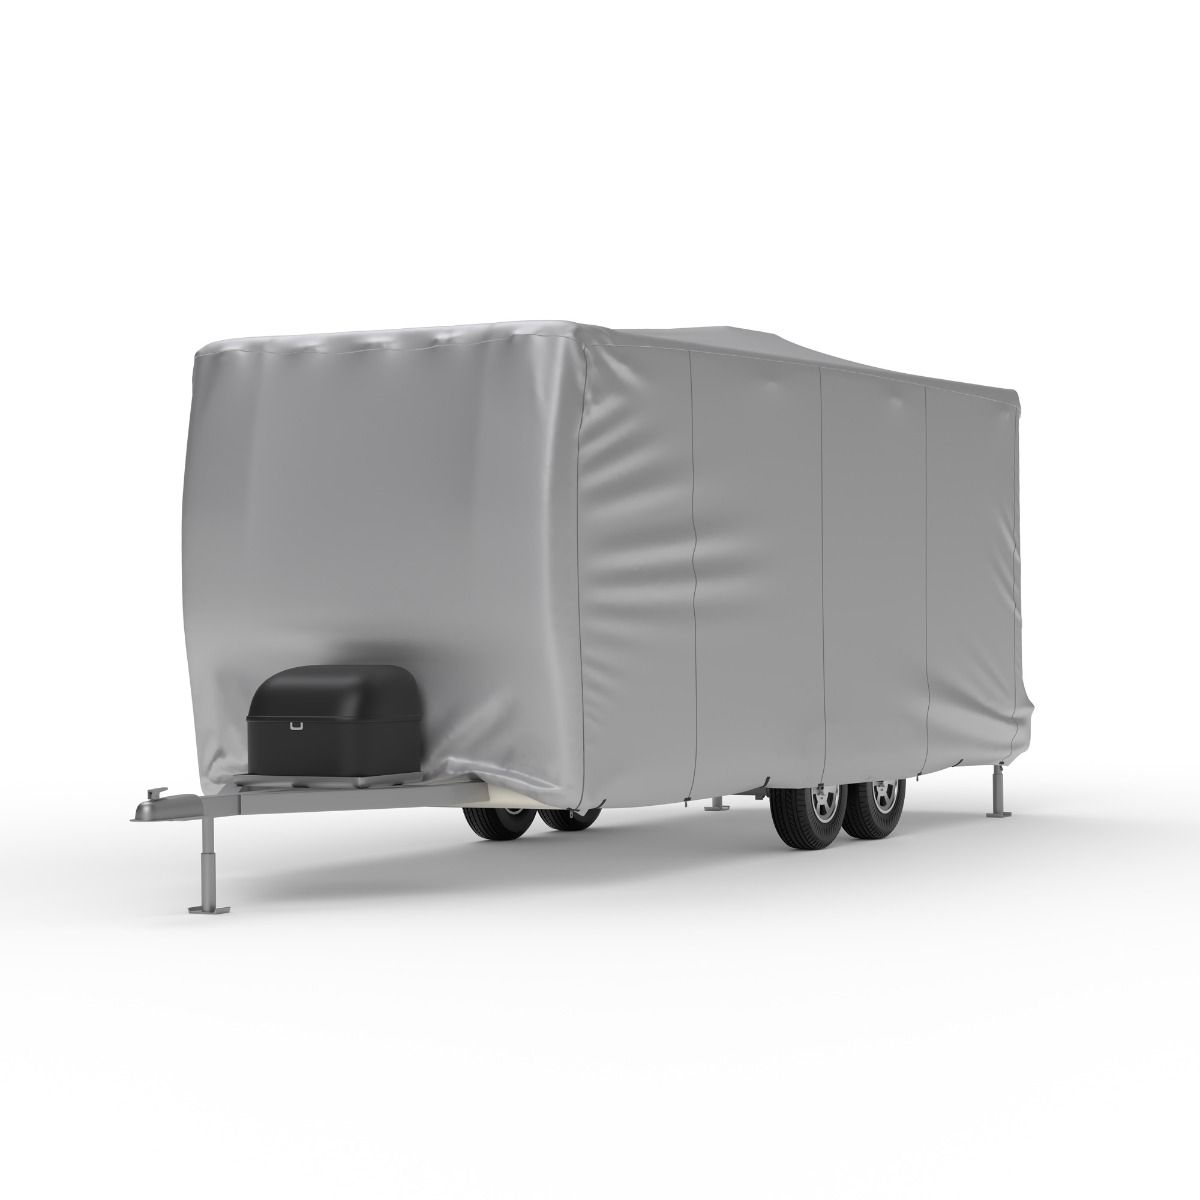 Platinum Shield Travel Trailer RV Cover (Fits 11.5' to 13.5' Long)